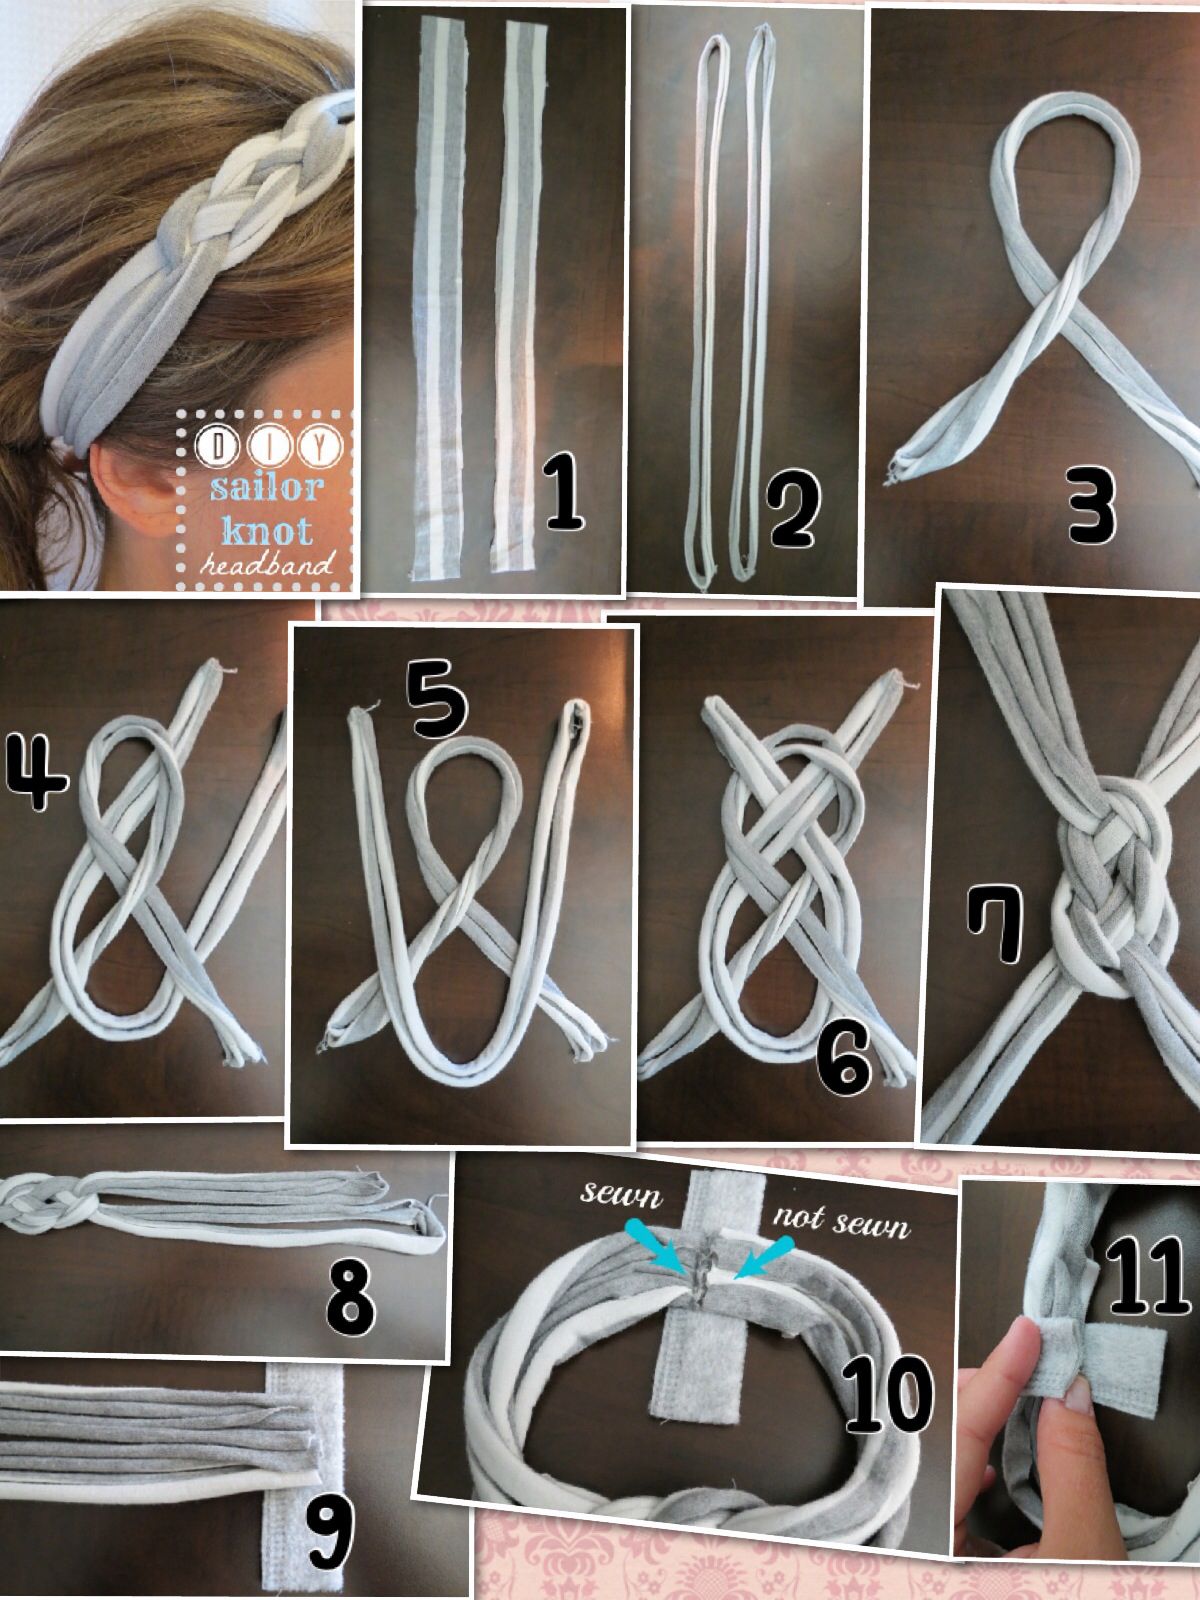 Diy sailor knot headband . The link to the original one is here ...